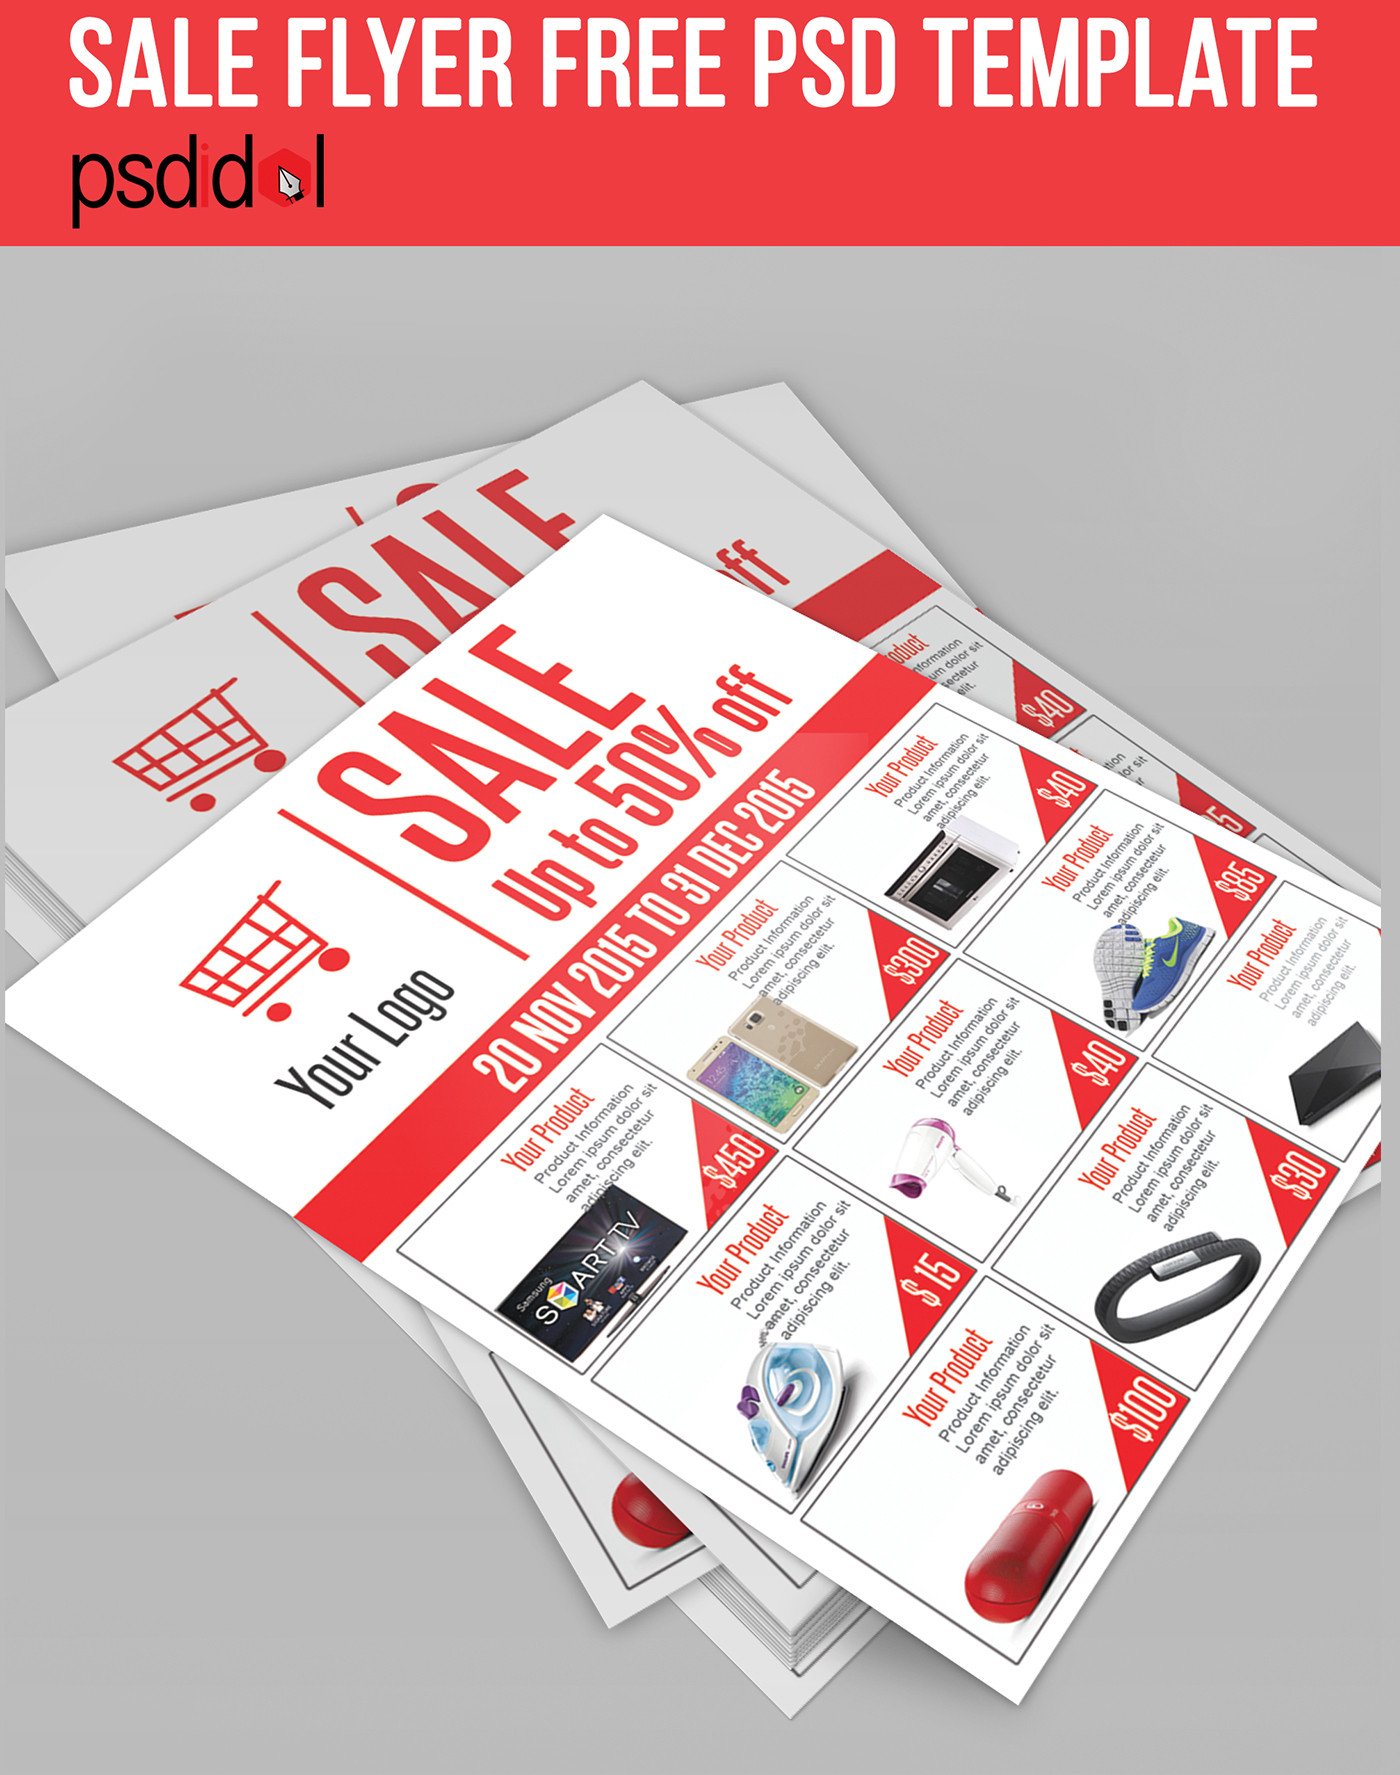 Sale Flyer Free PSD Template Download on Behance